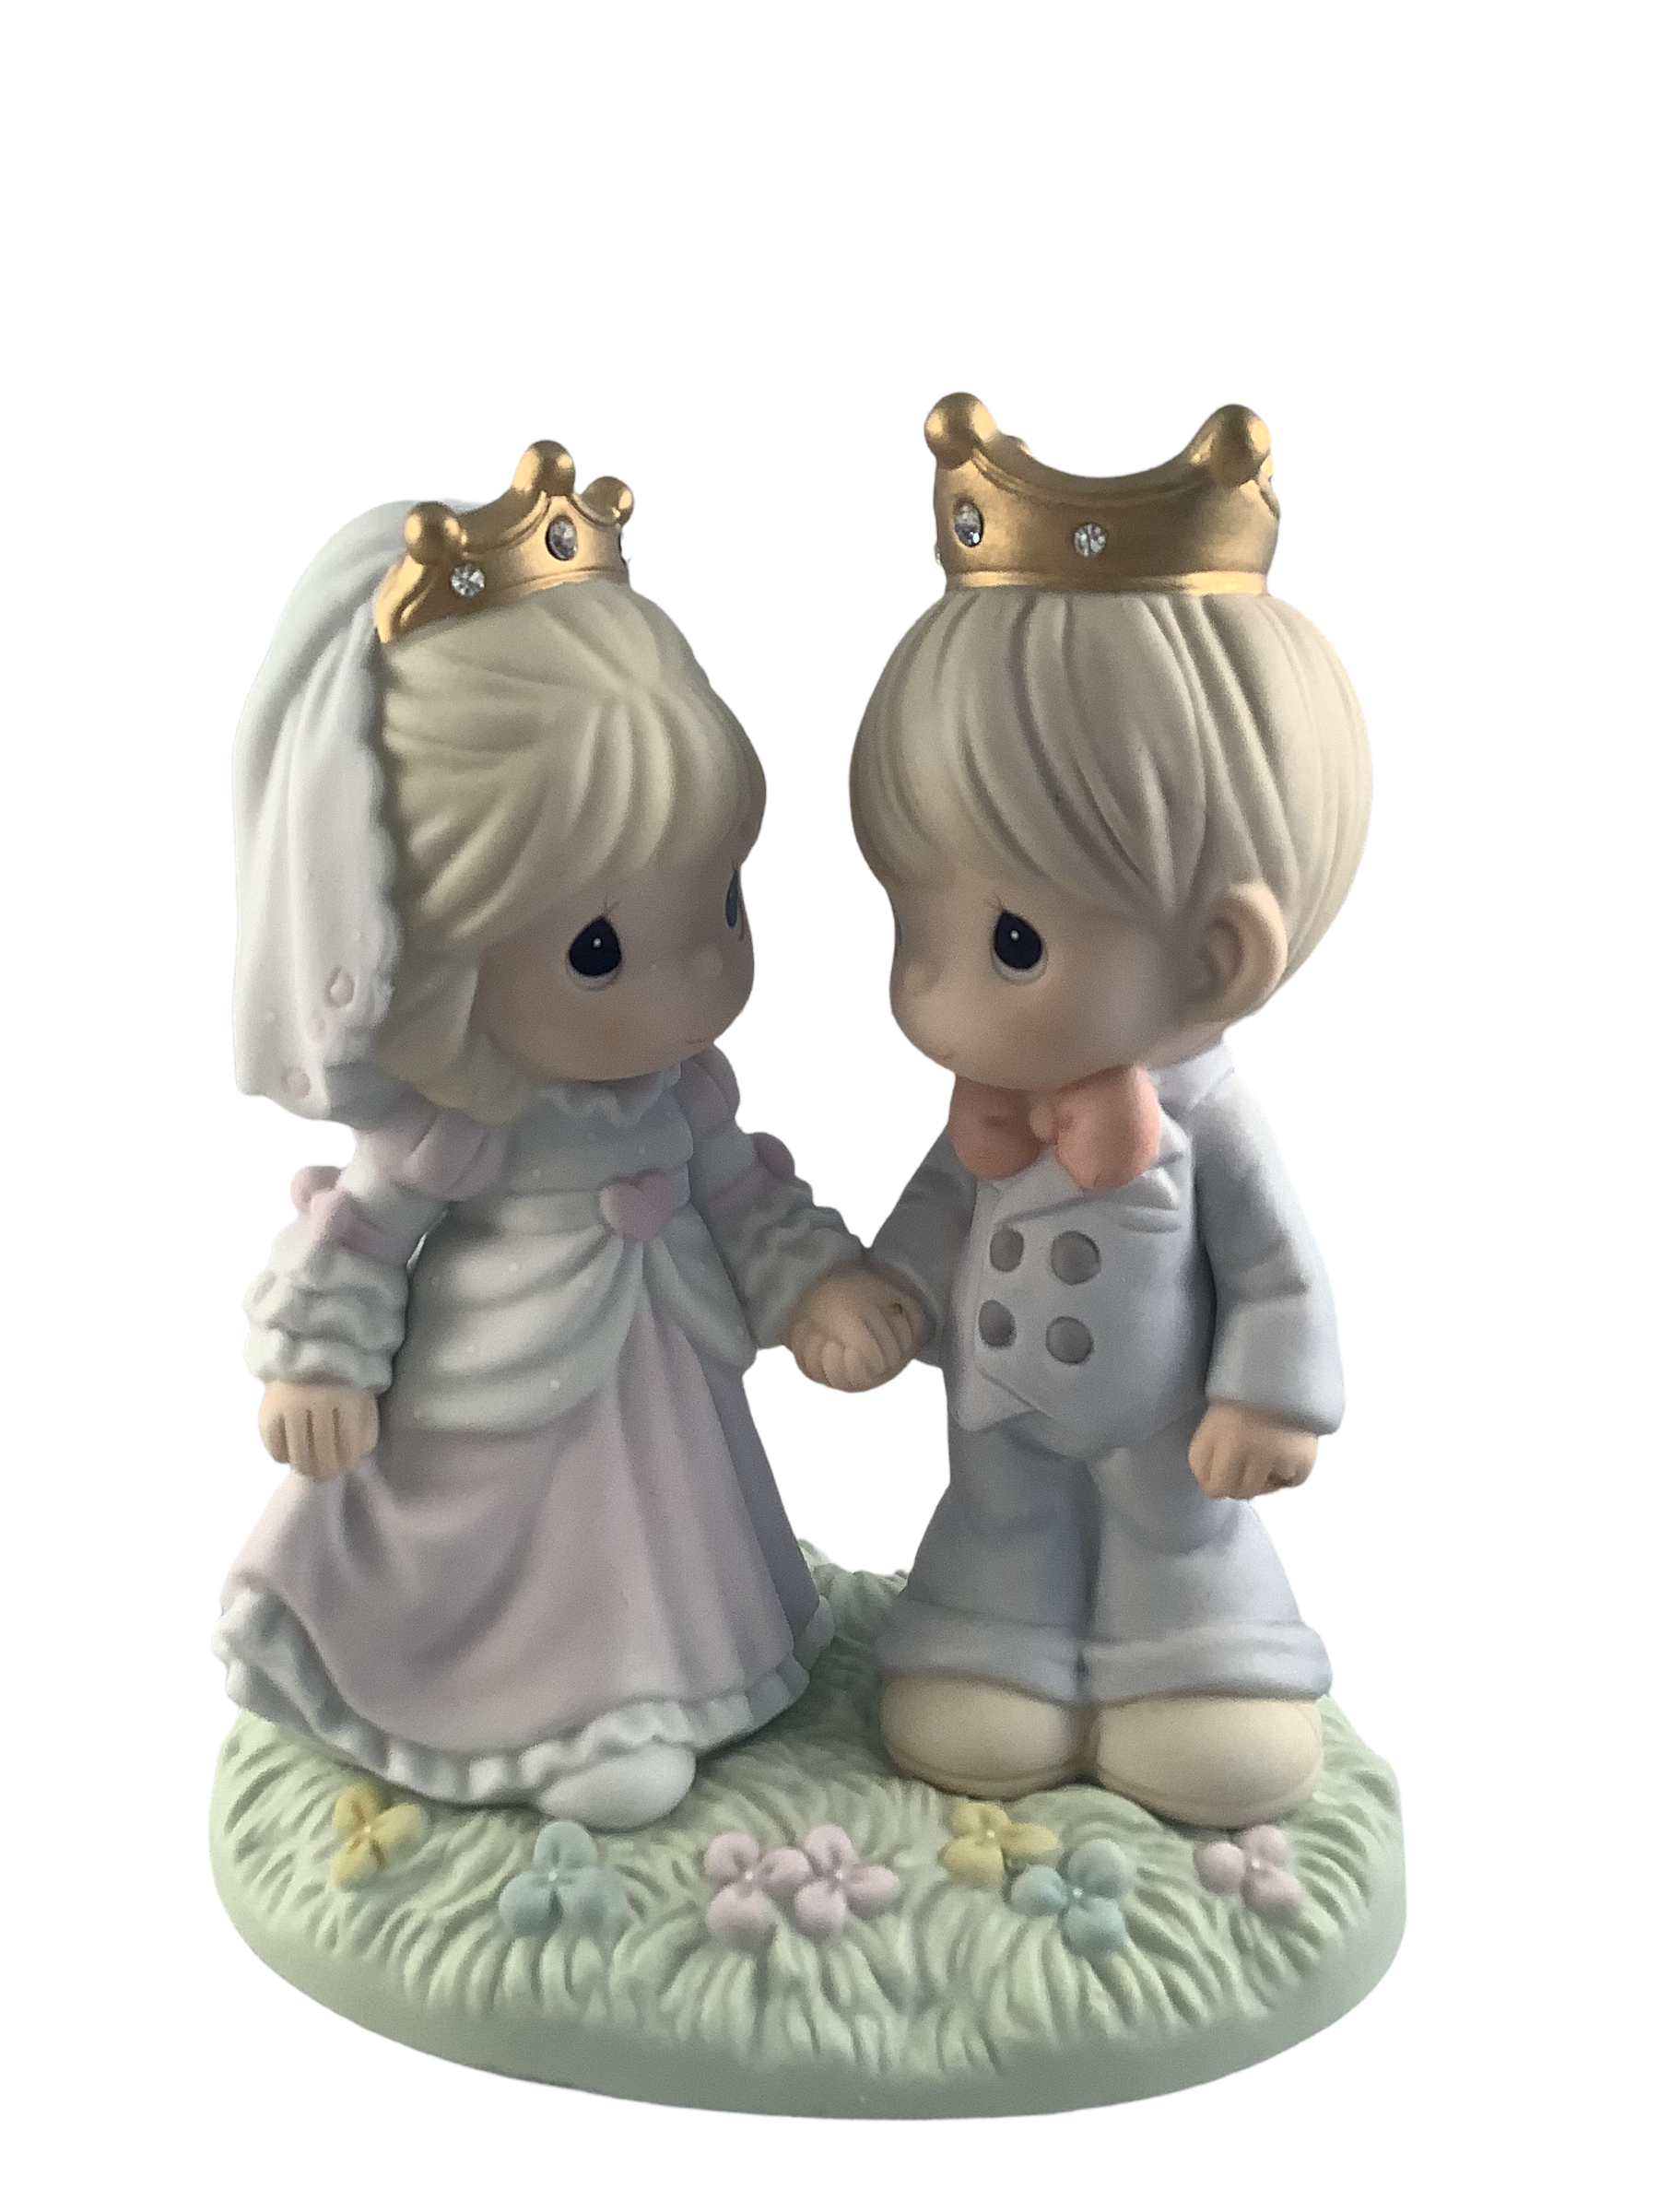 Happily Ever After - Precious Moment Figurine